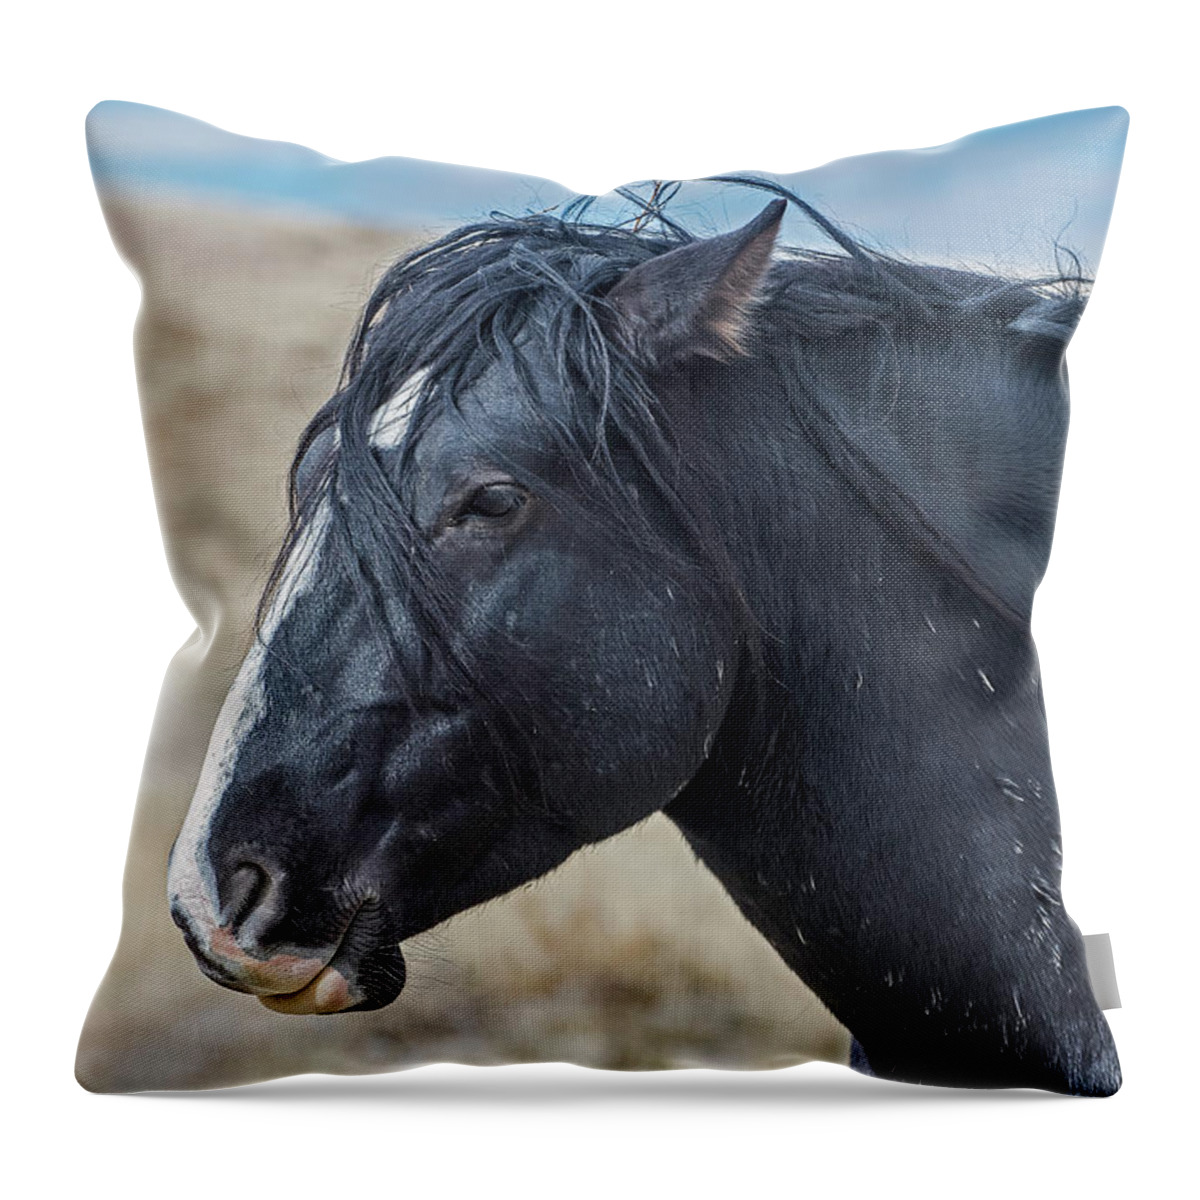 Horse Throw Pillow featuring the photograph Wild Horse Profile by Scott Read